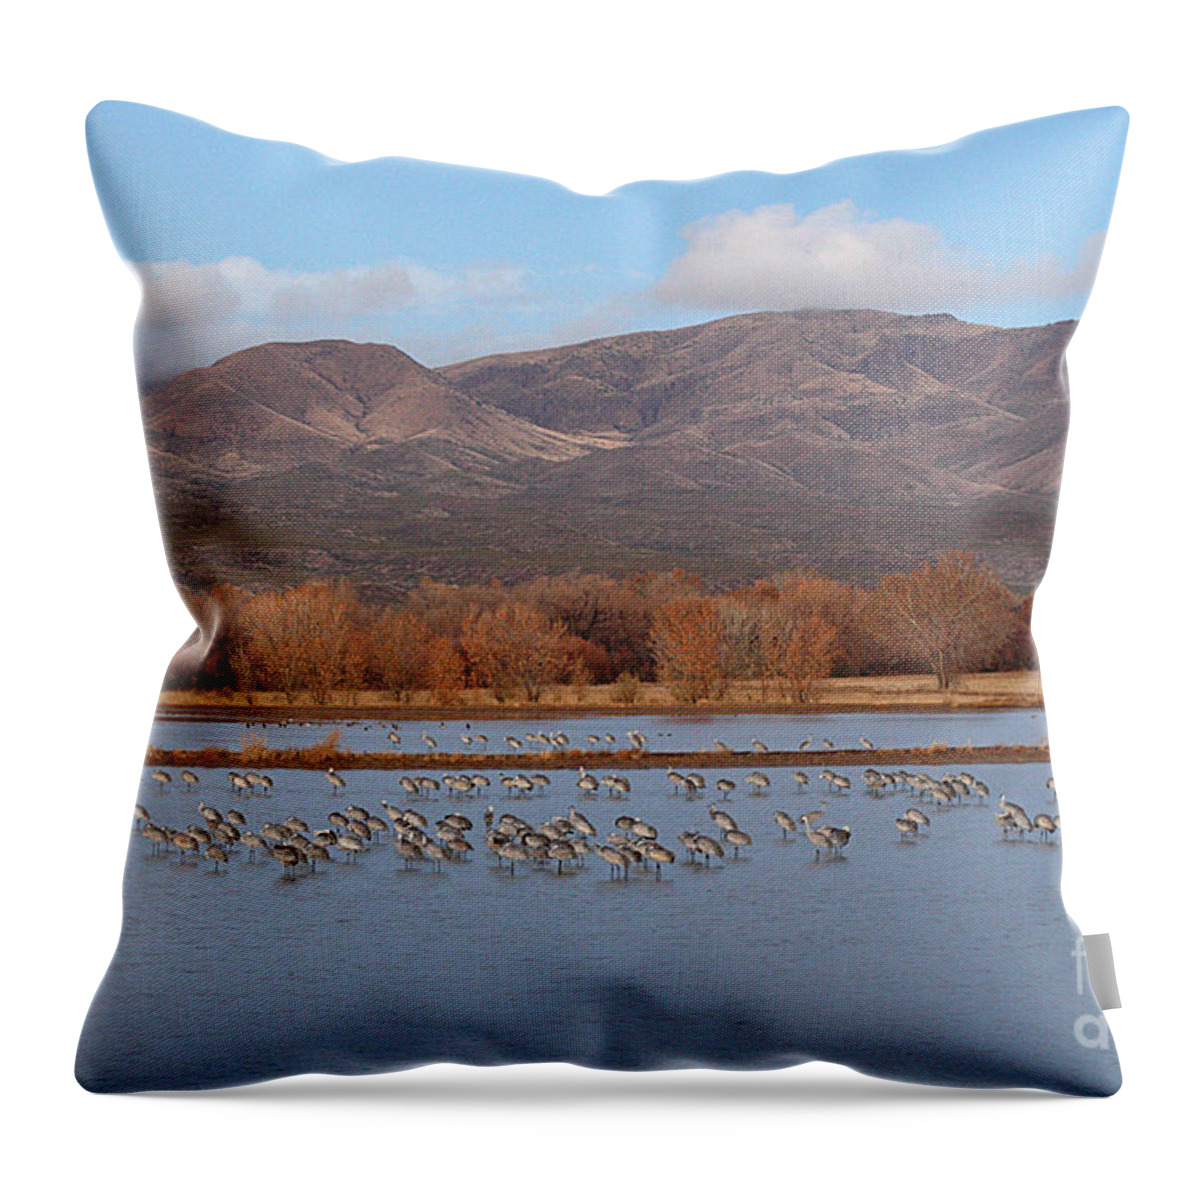 Sandhill Crane Throw Pillow featuring the photograph Sandhill Cranes Beneath The Mountains Of New Mexico by Max Allen